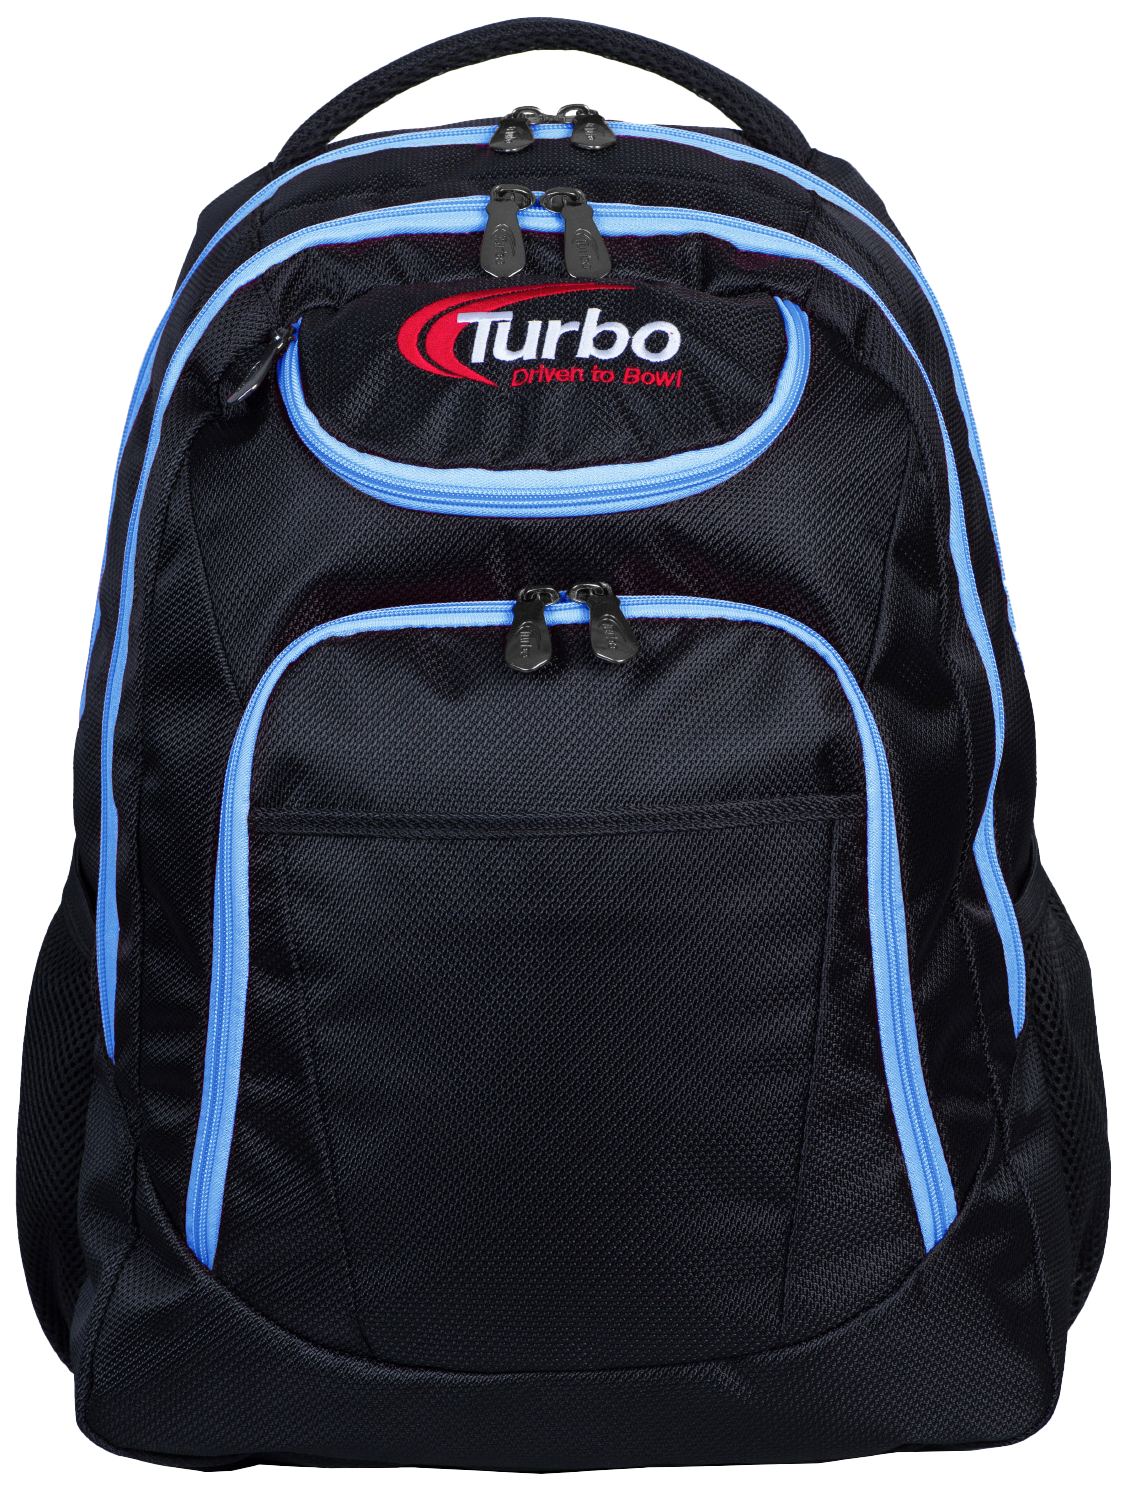 Copy of Turbo Shuttle Bowling Backpack Black/Blue